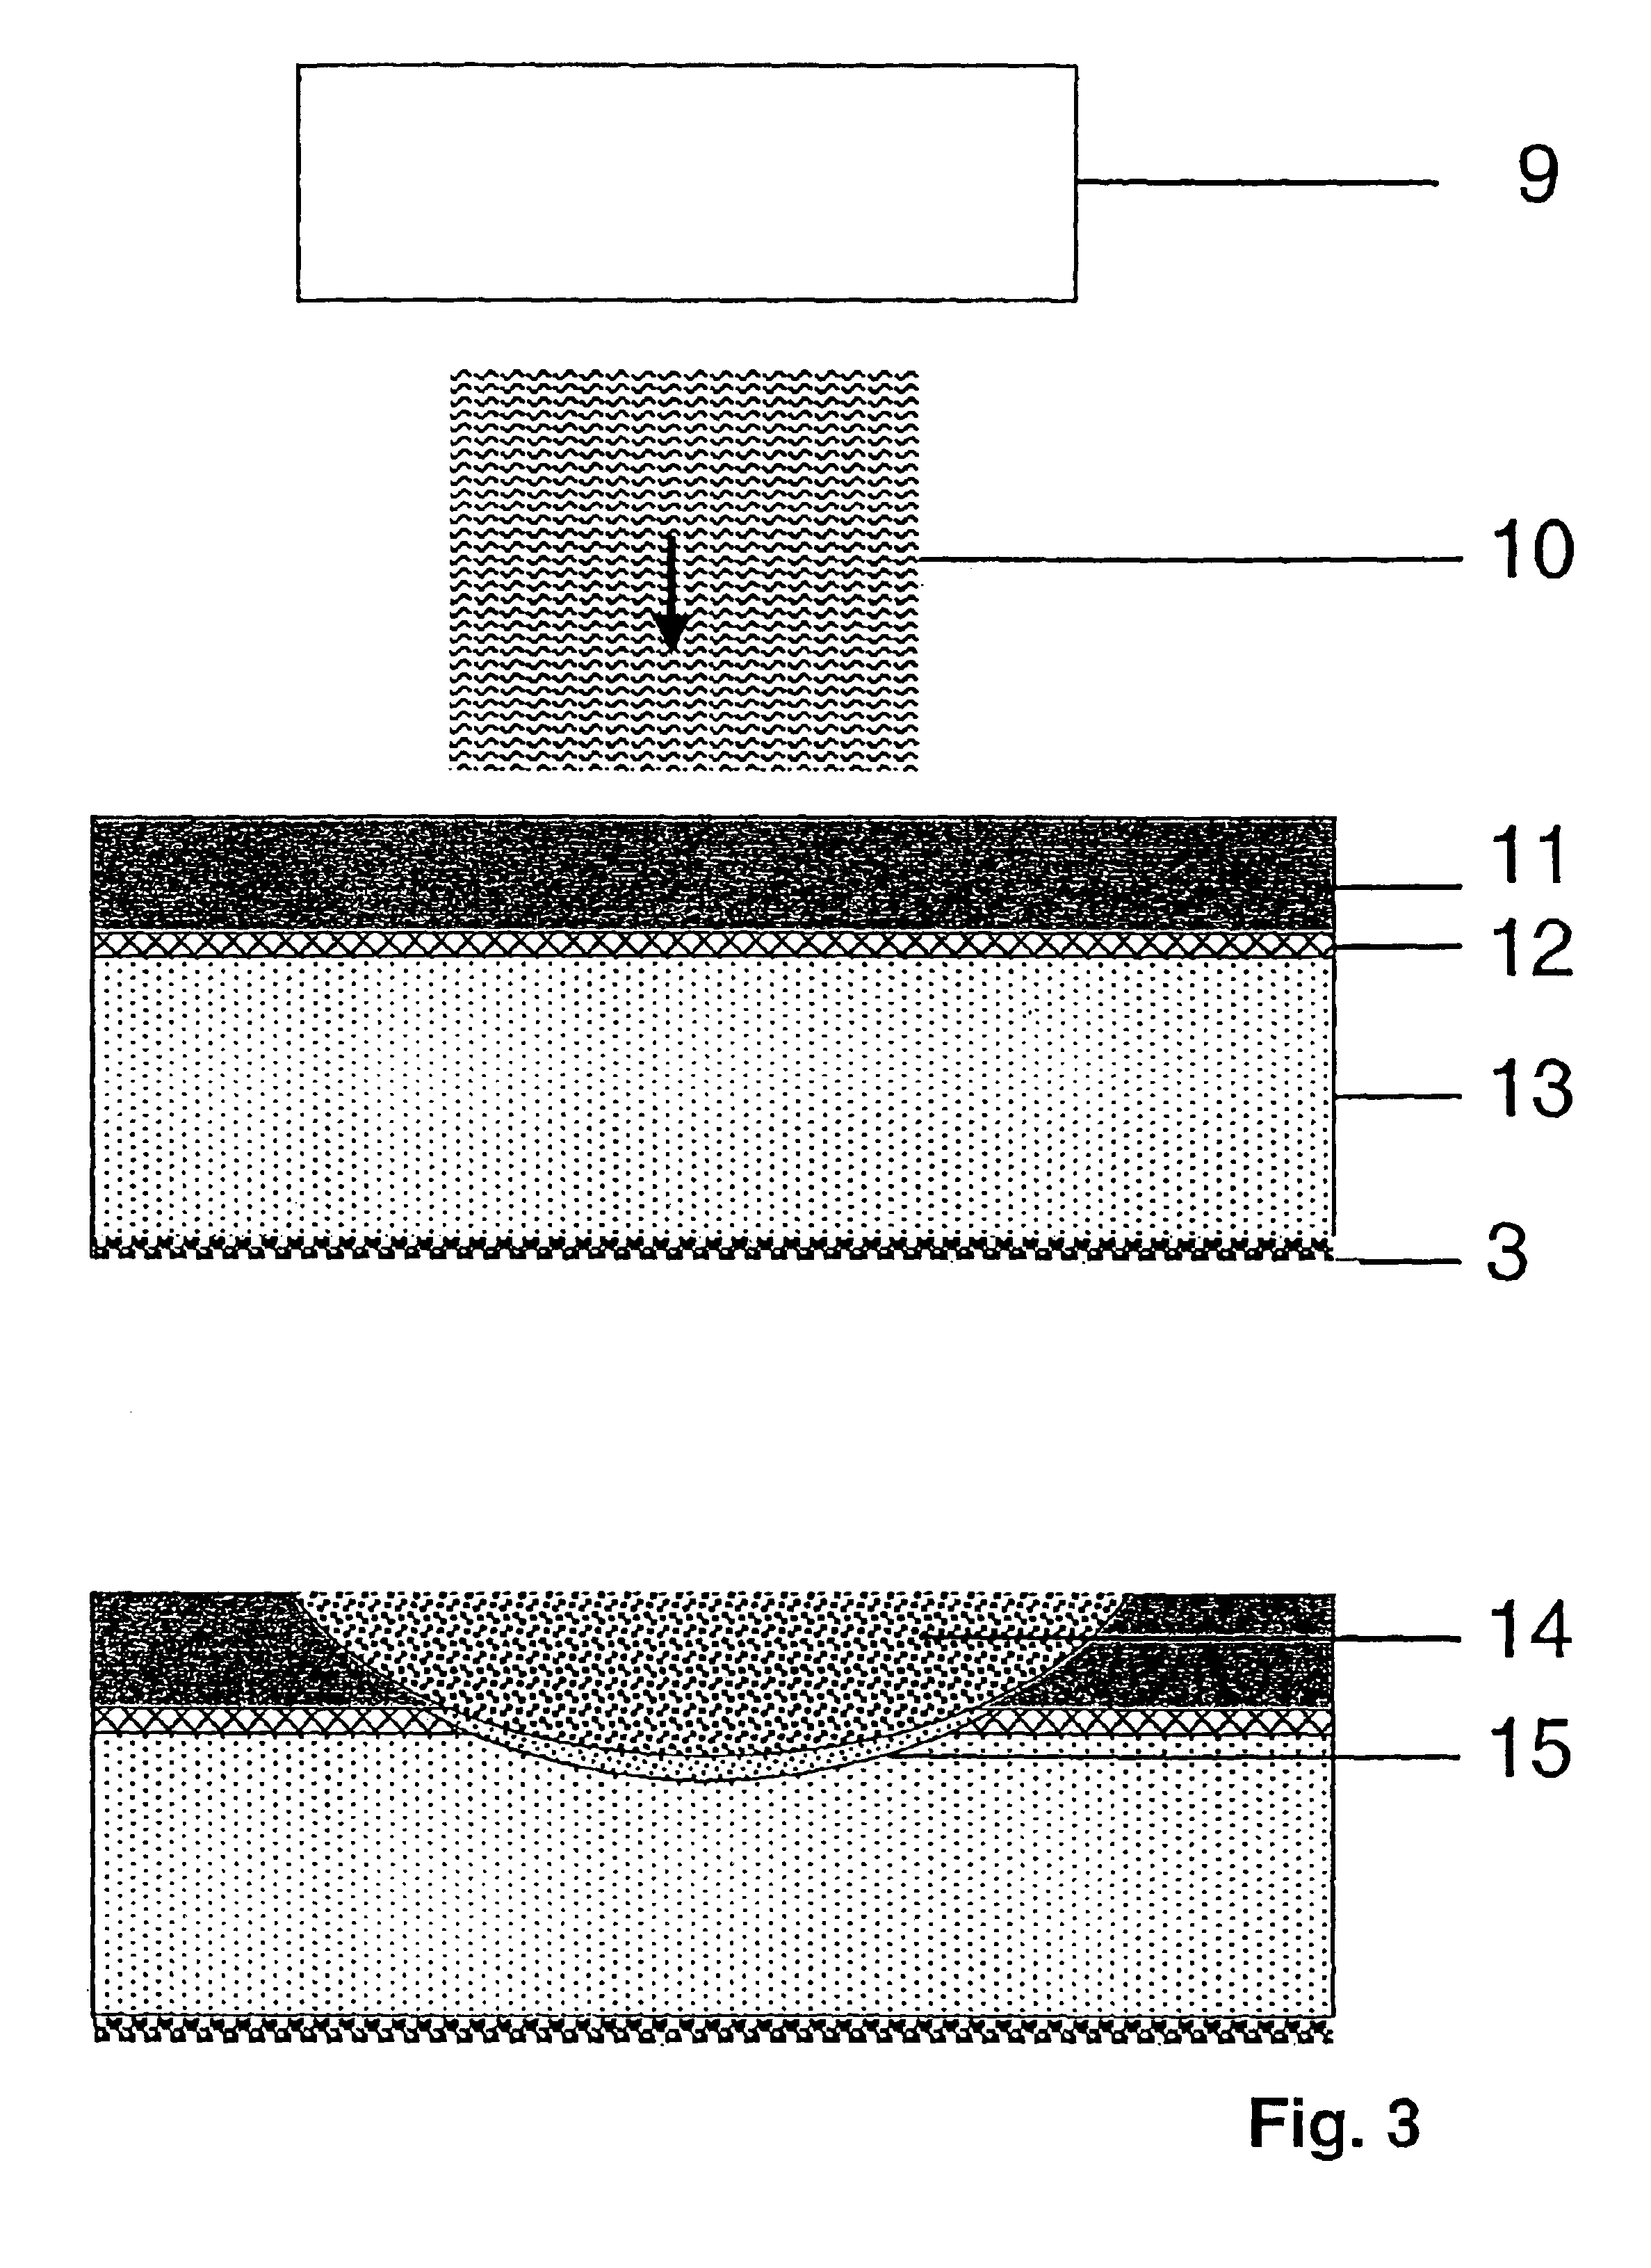 Method of producing a semiconductor-metal contact through a dielectric layer